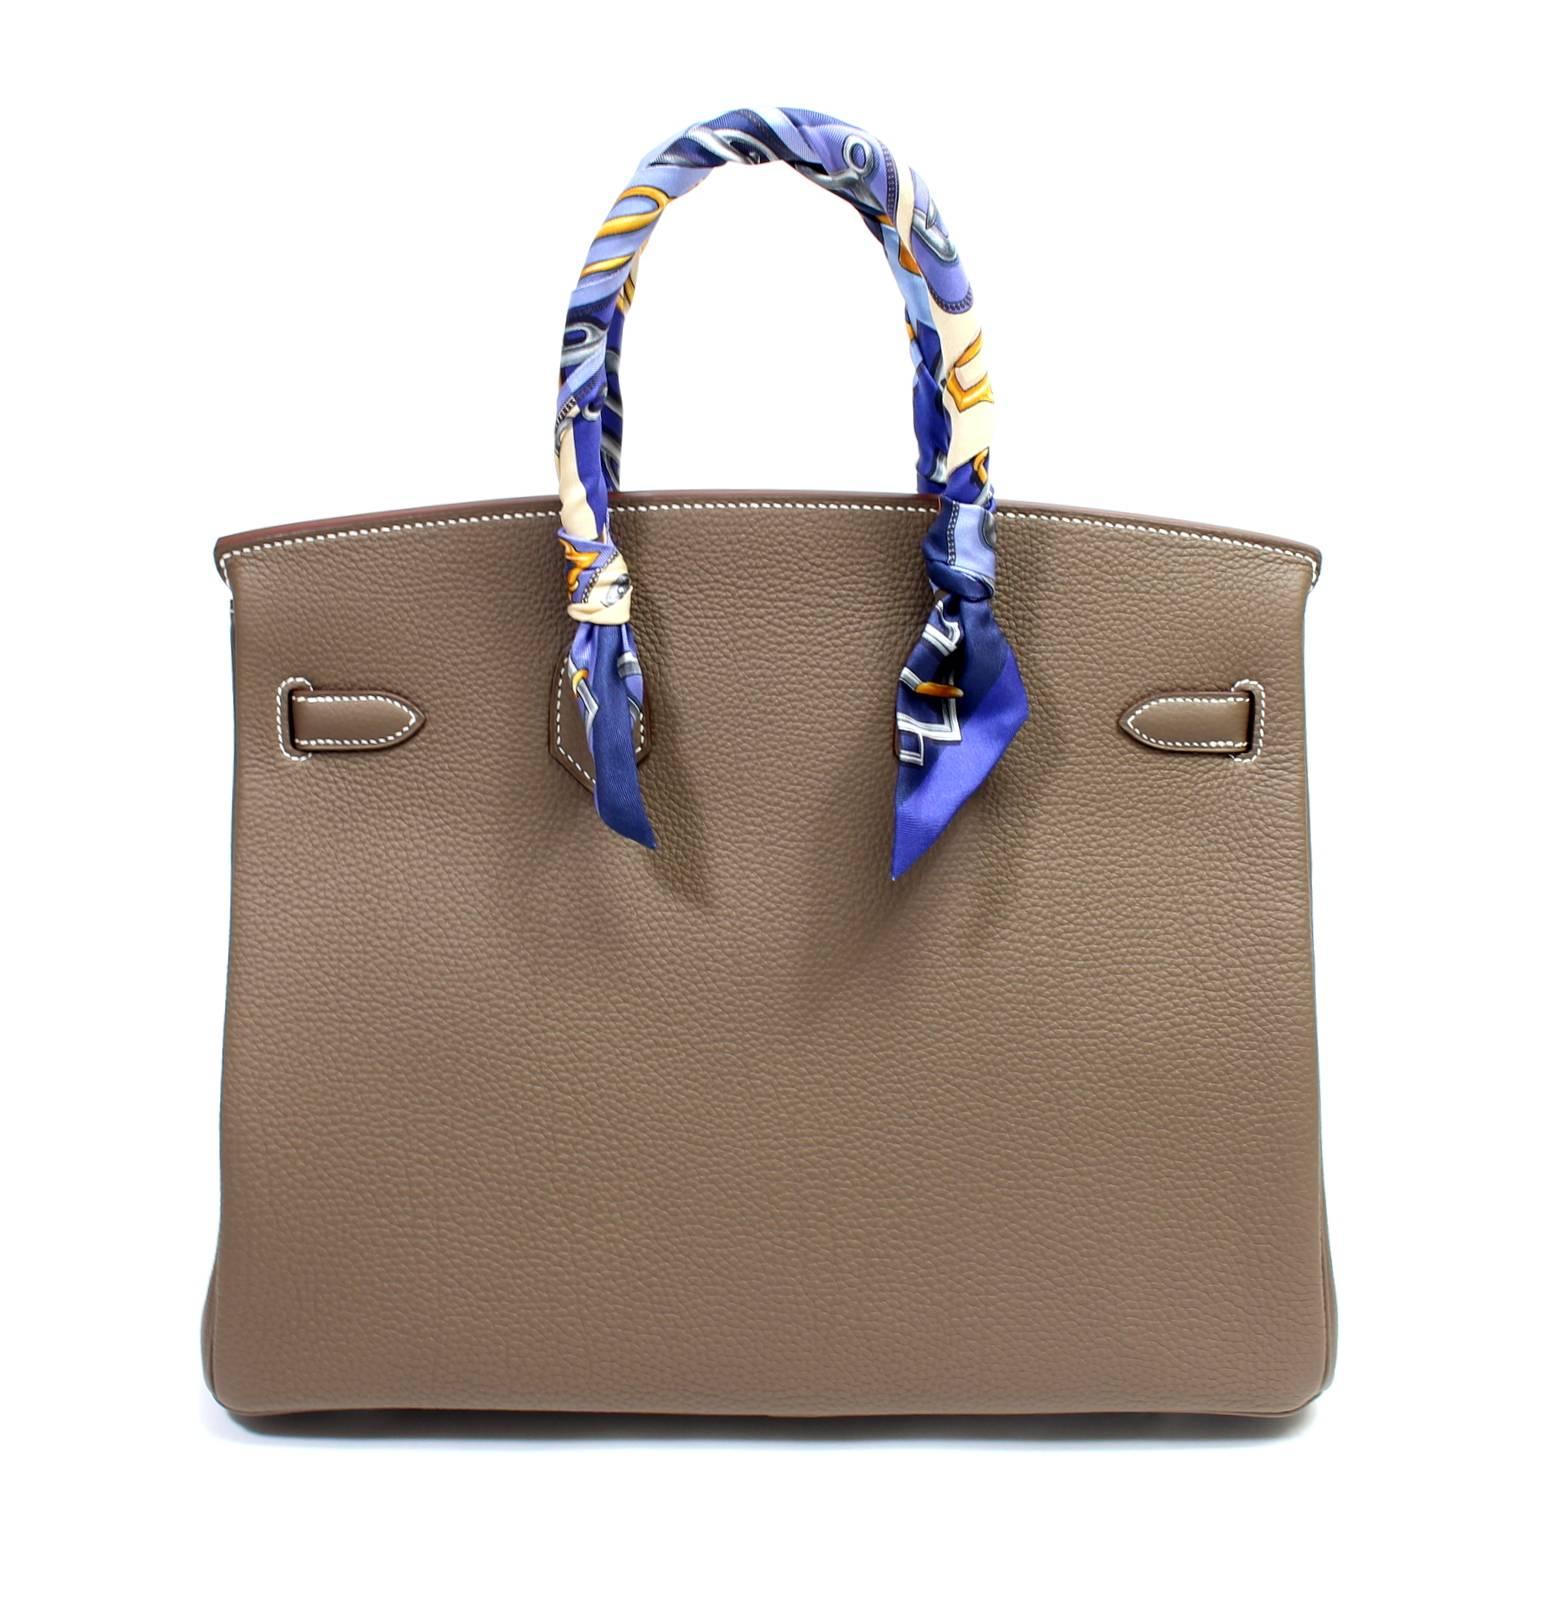 Hermès Etoupe Togo 35 cm Birkin Bag- PRISTINE; store fresh with plastic on all the hardware. 

Wildly sought after greige neutral, known as Etoupe, can be carried year-round.
 Handcrafted by skilled craftsmen and coveted by the fashion elite around